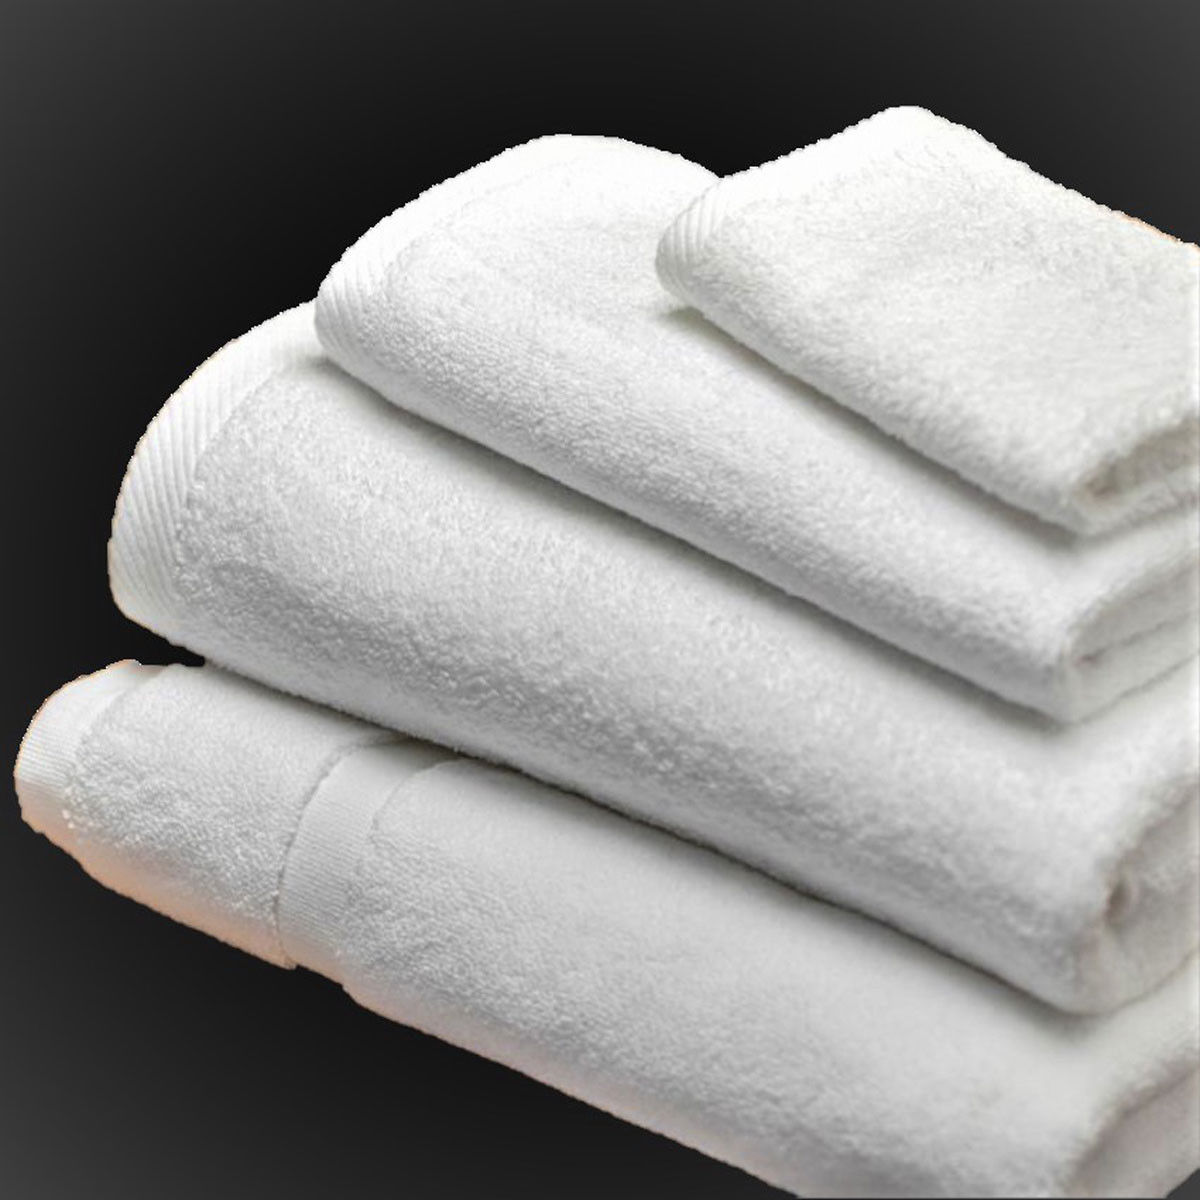 How does the texture feel on golden mills towels?